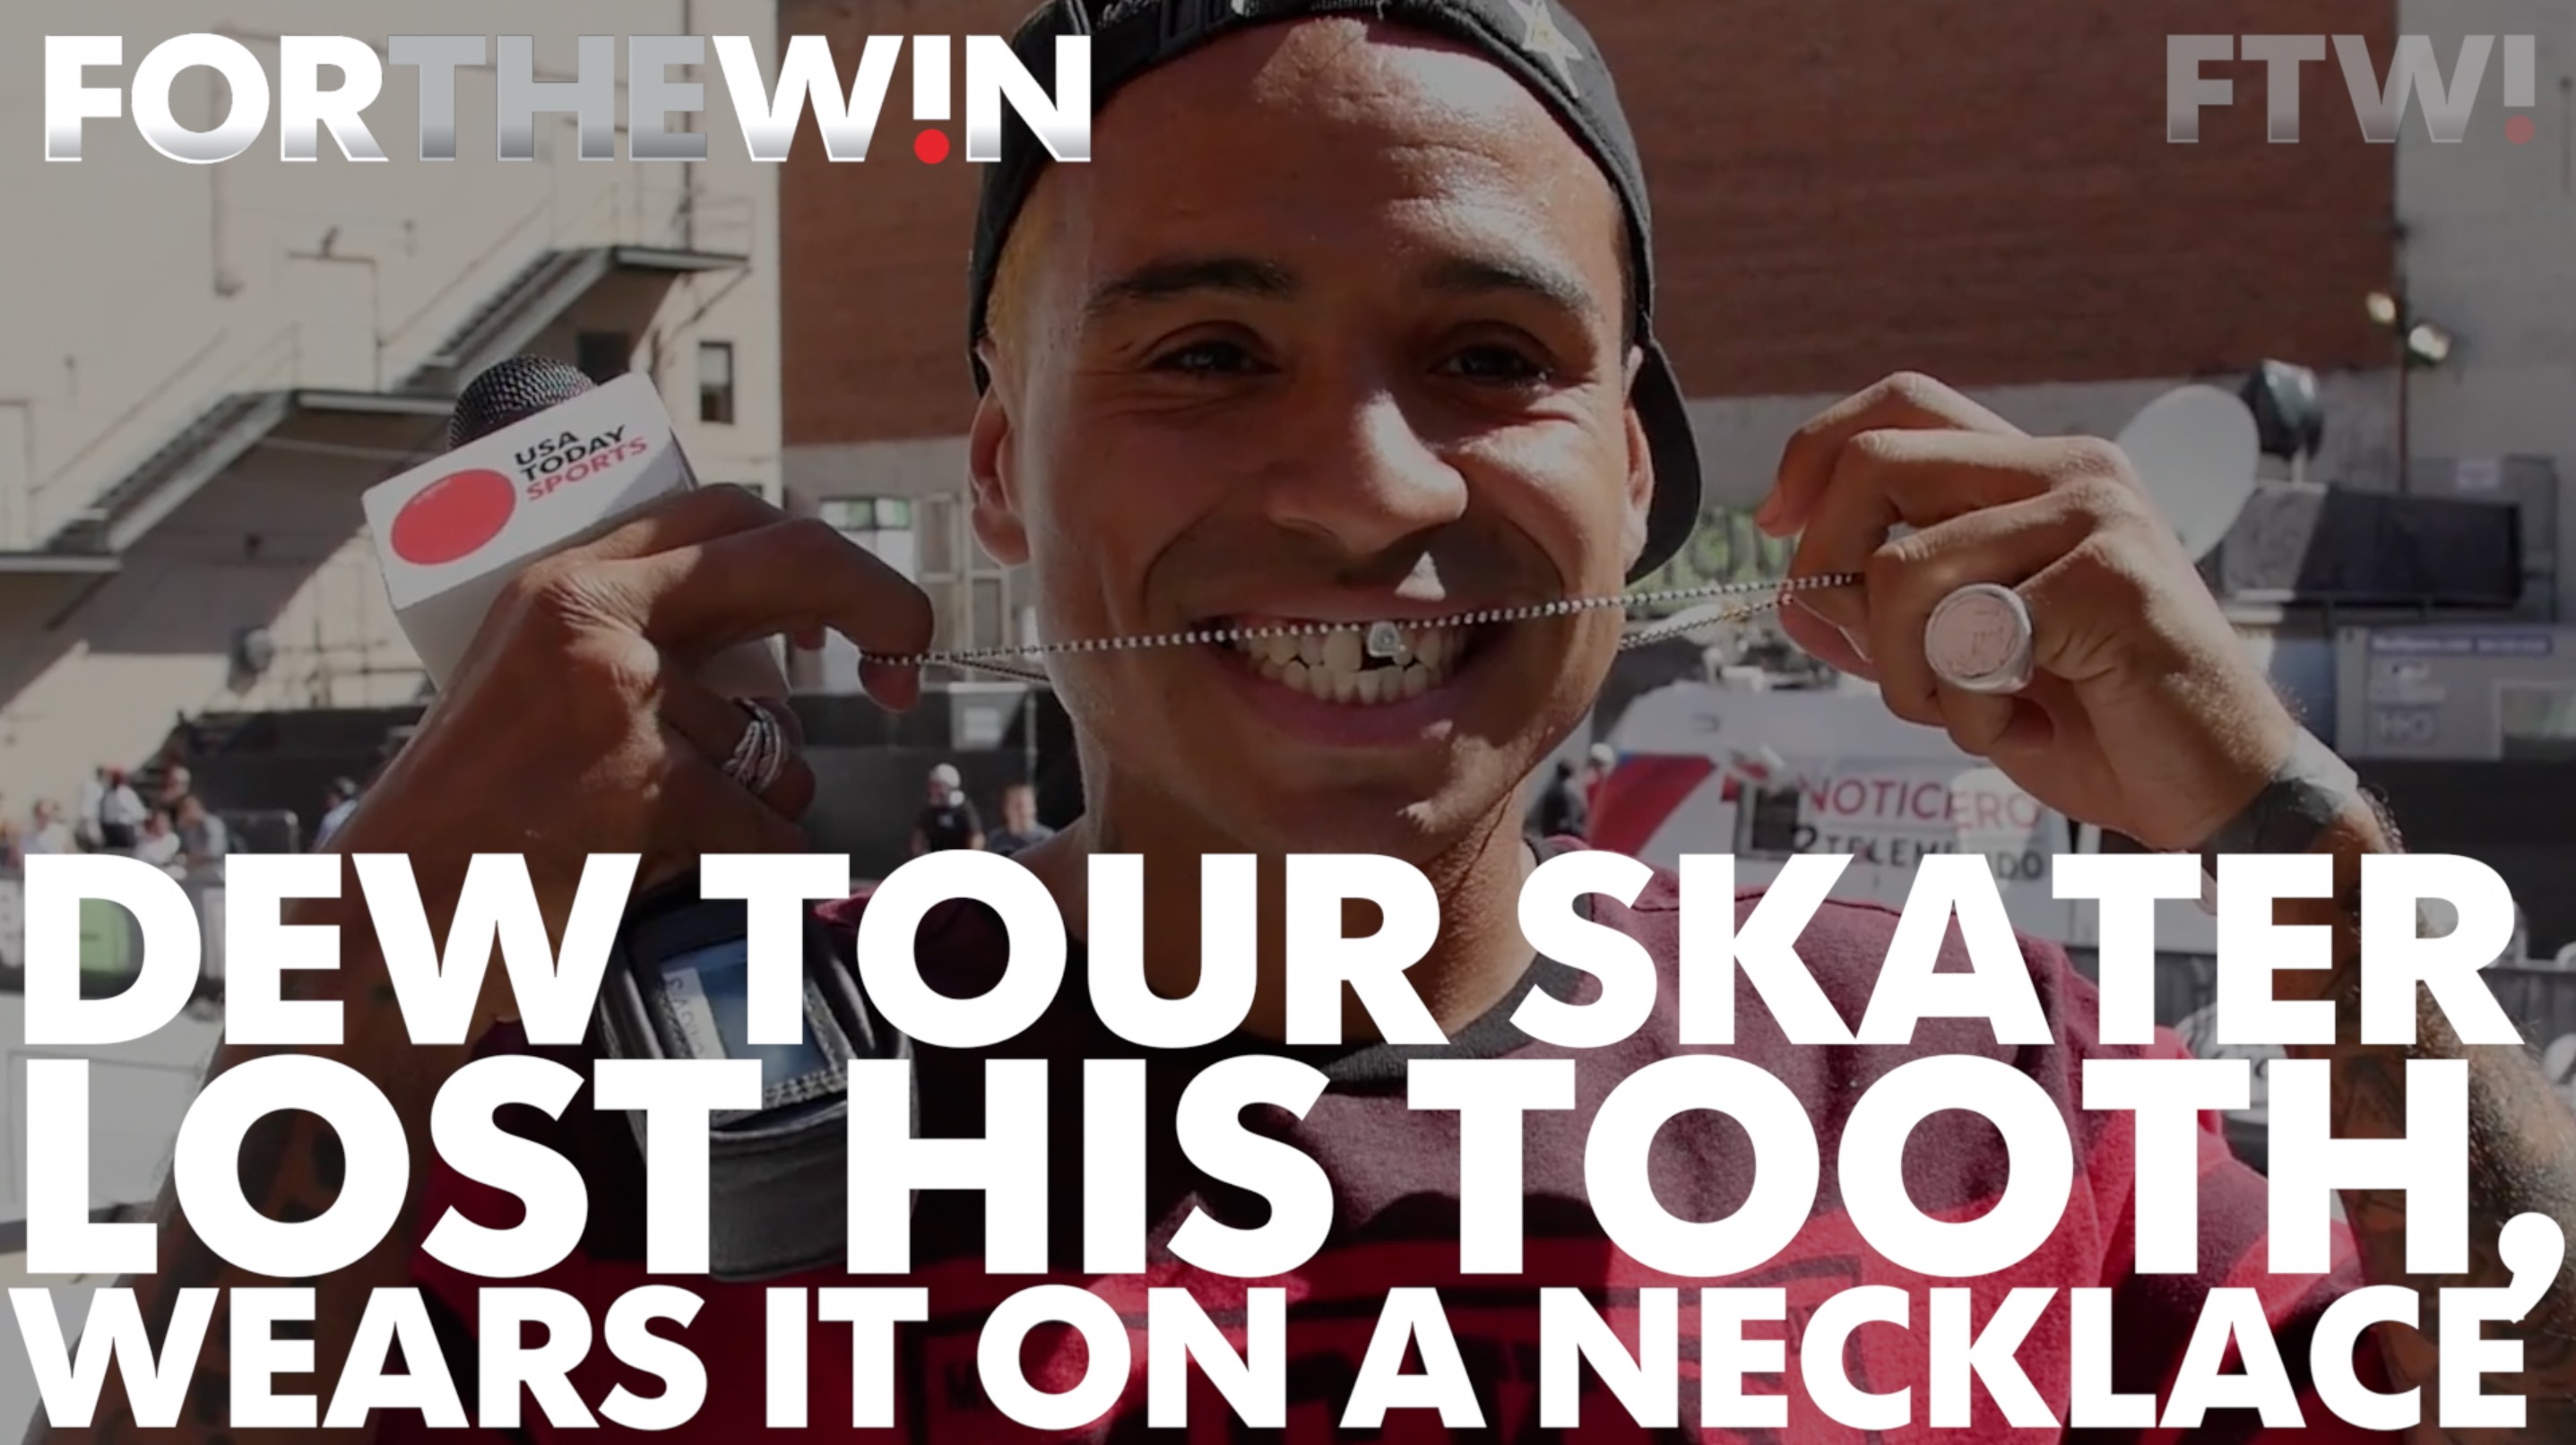 Dew Tour skater lost tooth, now wears it on a necklace